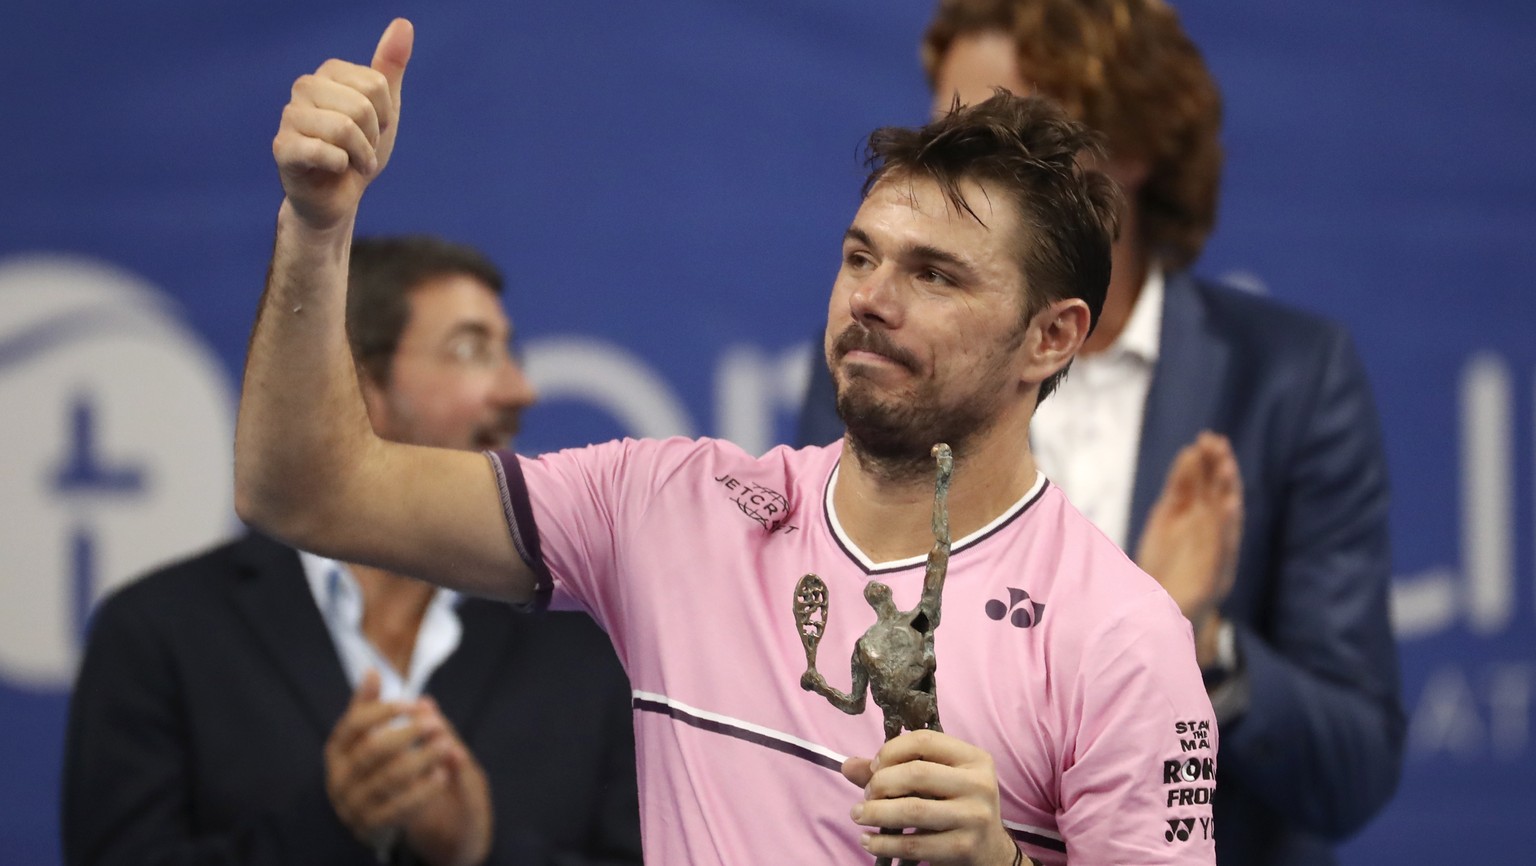 Stan Wawrinka of Switzerland gestures after receiving his second placed trophy at the European Open final tennis match in Antwerp, Belgium, Sunday, Oct. 20, 2019. Andy Murray of Britain defeated Wawri ...